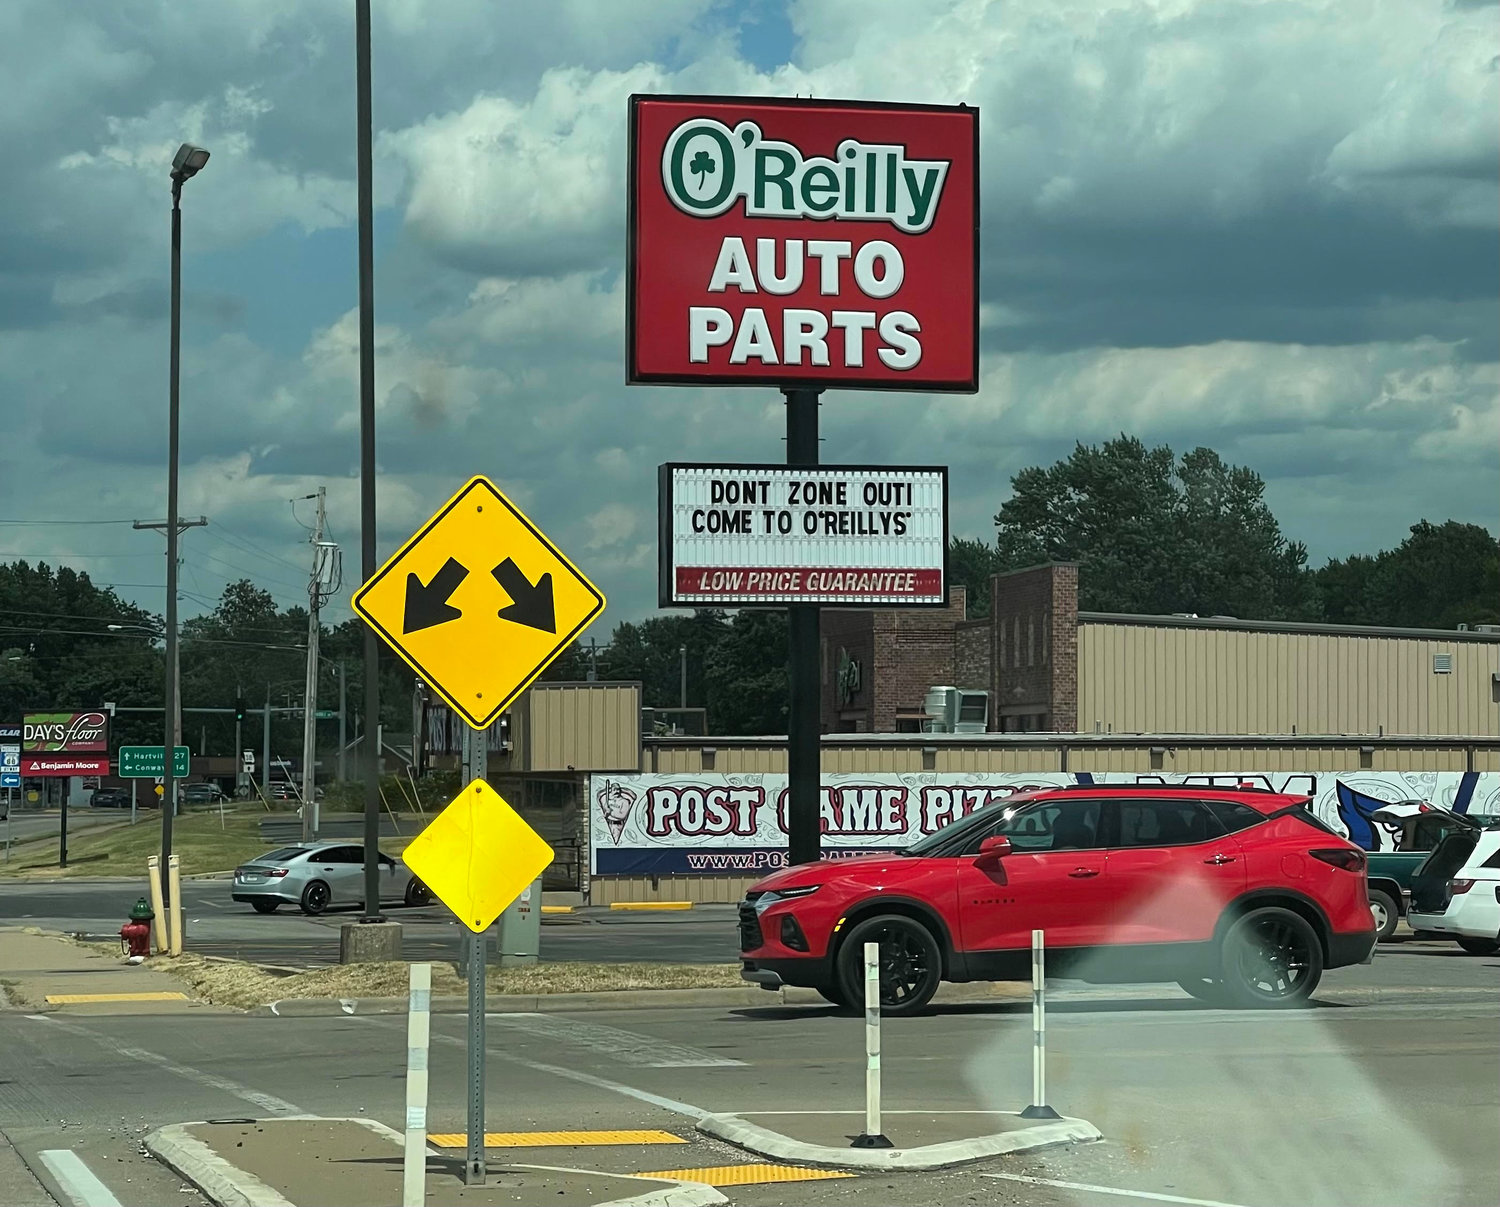 O’Reilly jumps into the sign war with a play on words. Is that a challenge to their neighbor Autozone across the street?